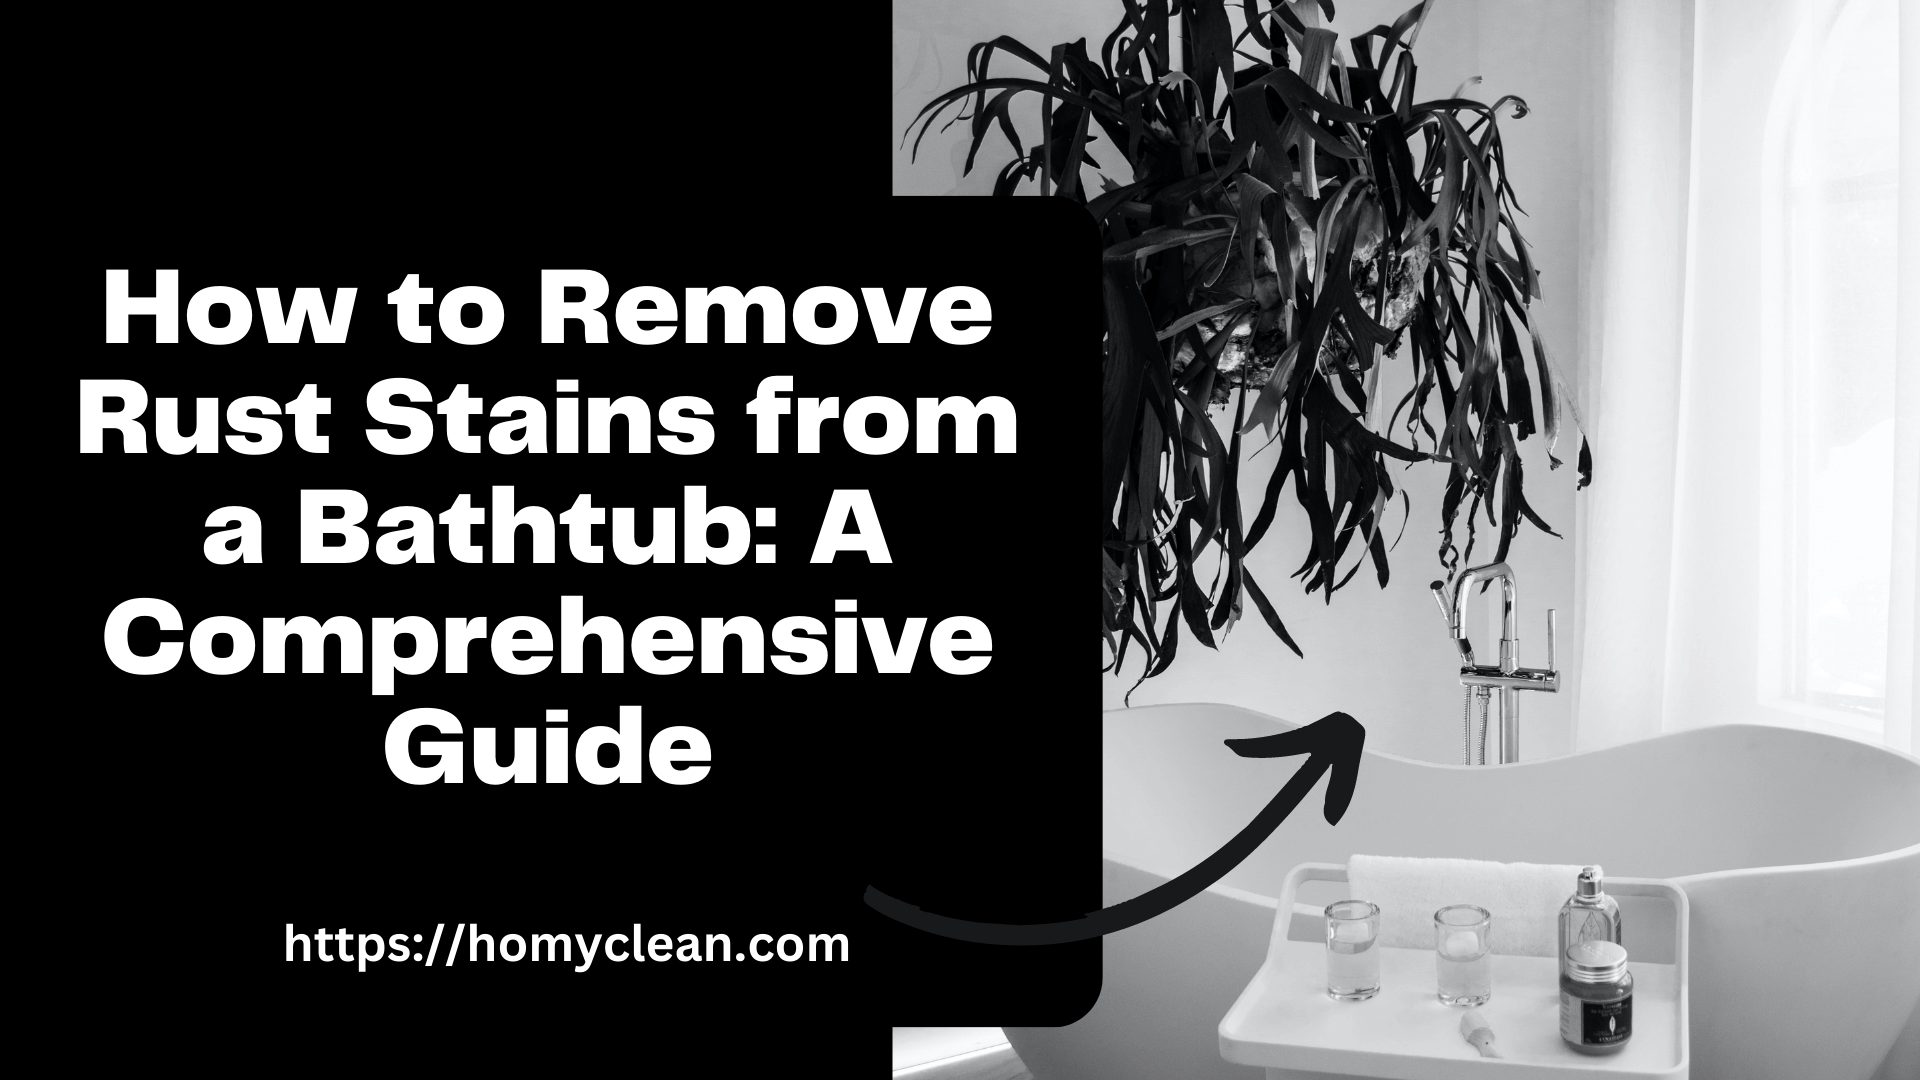 How to Remove Rust Stains from a Bathtub: A Comprehensive Guide